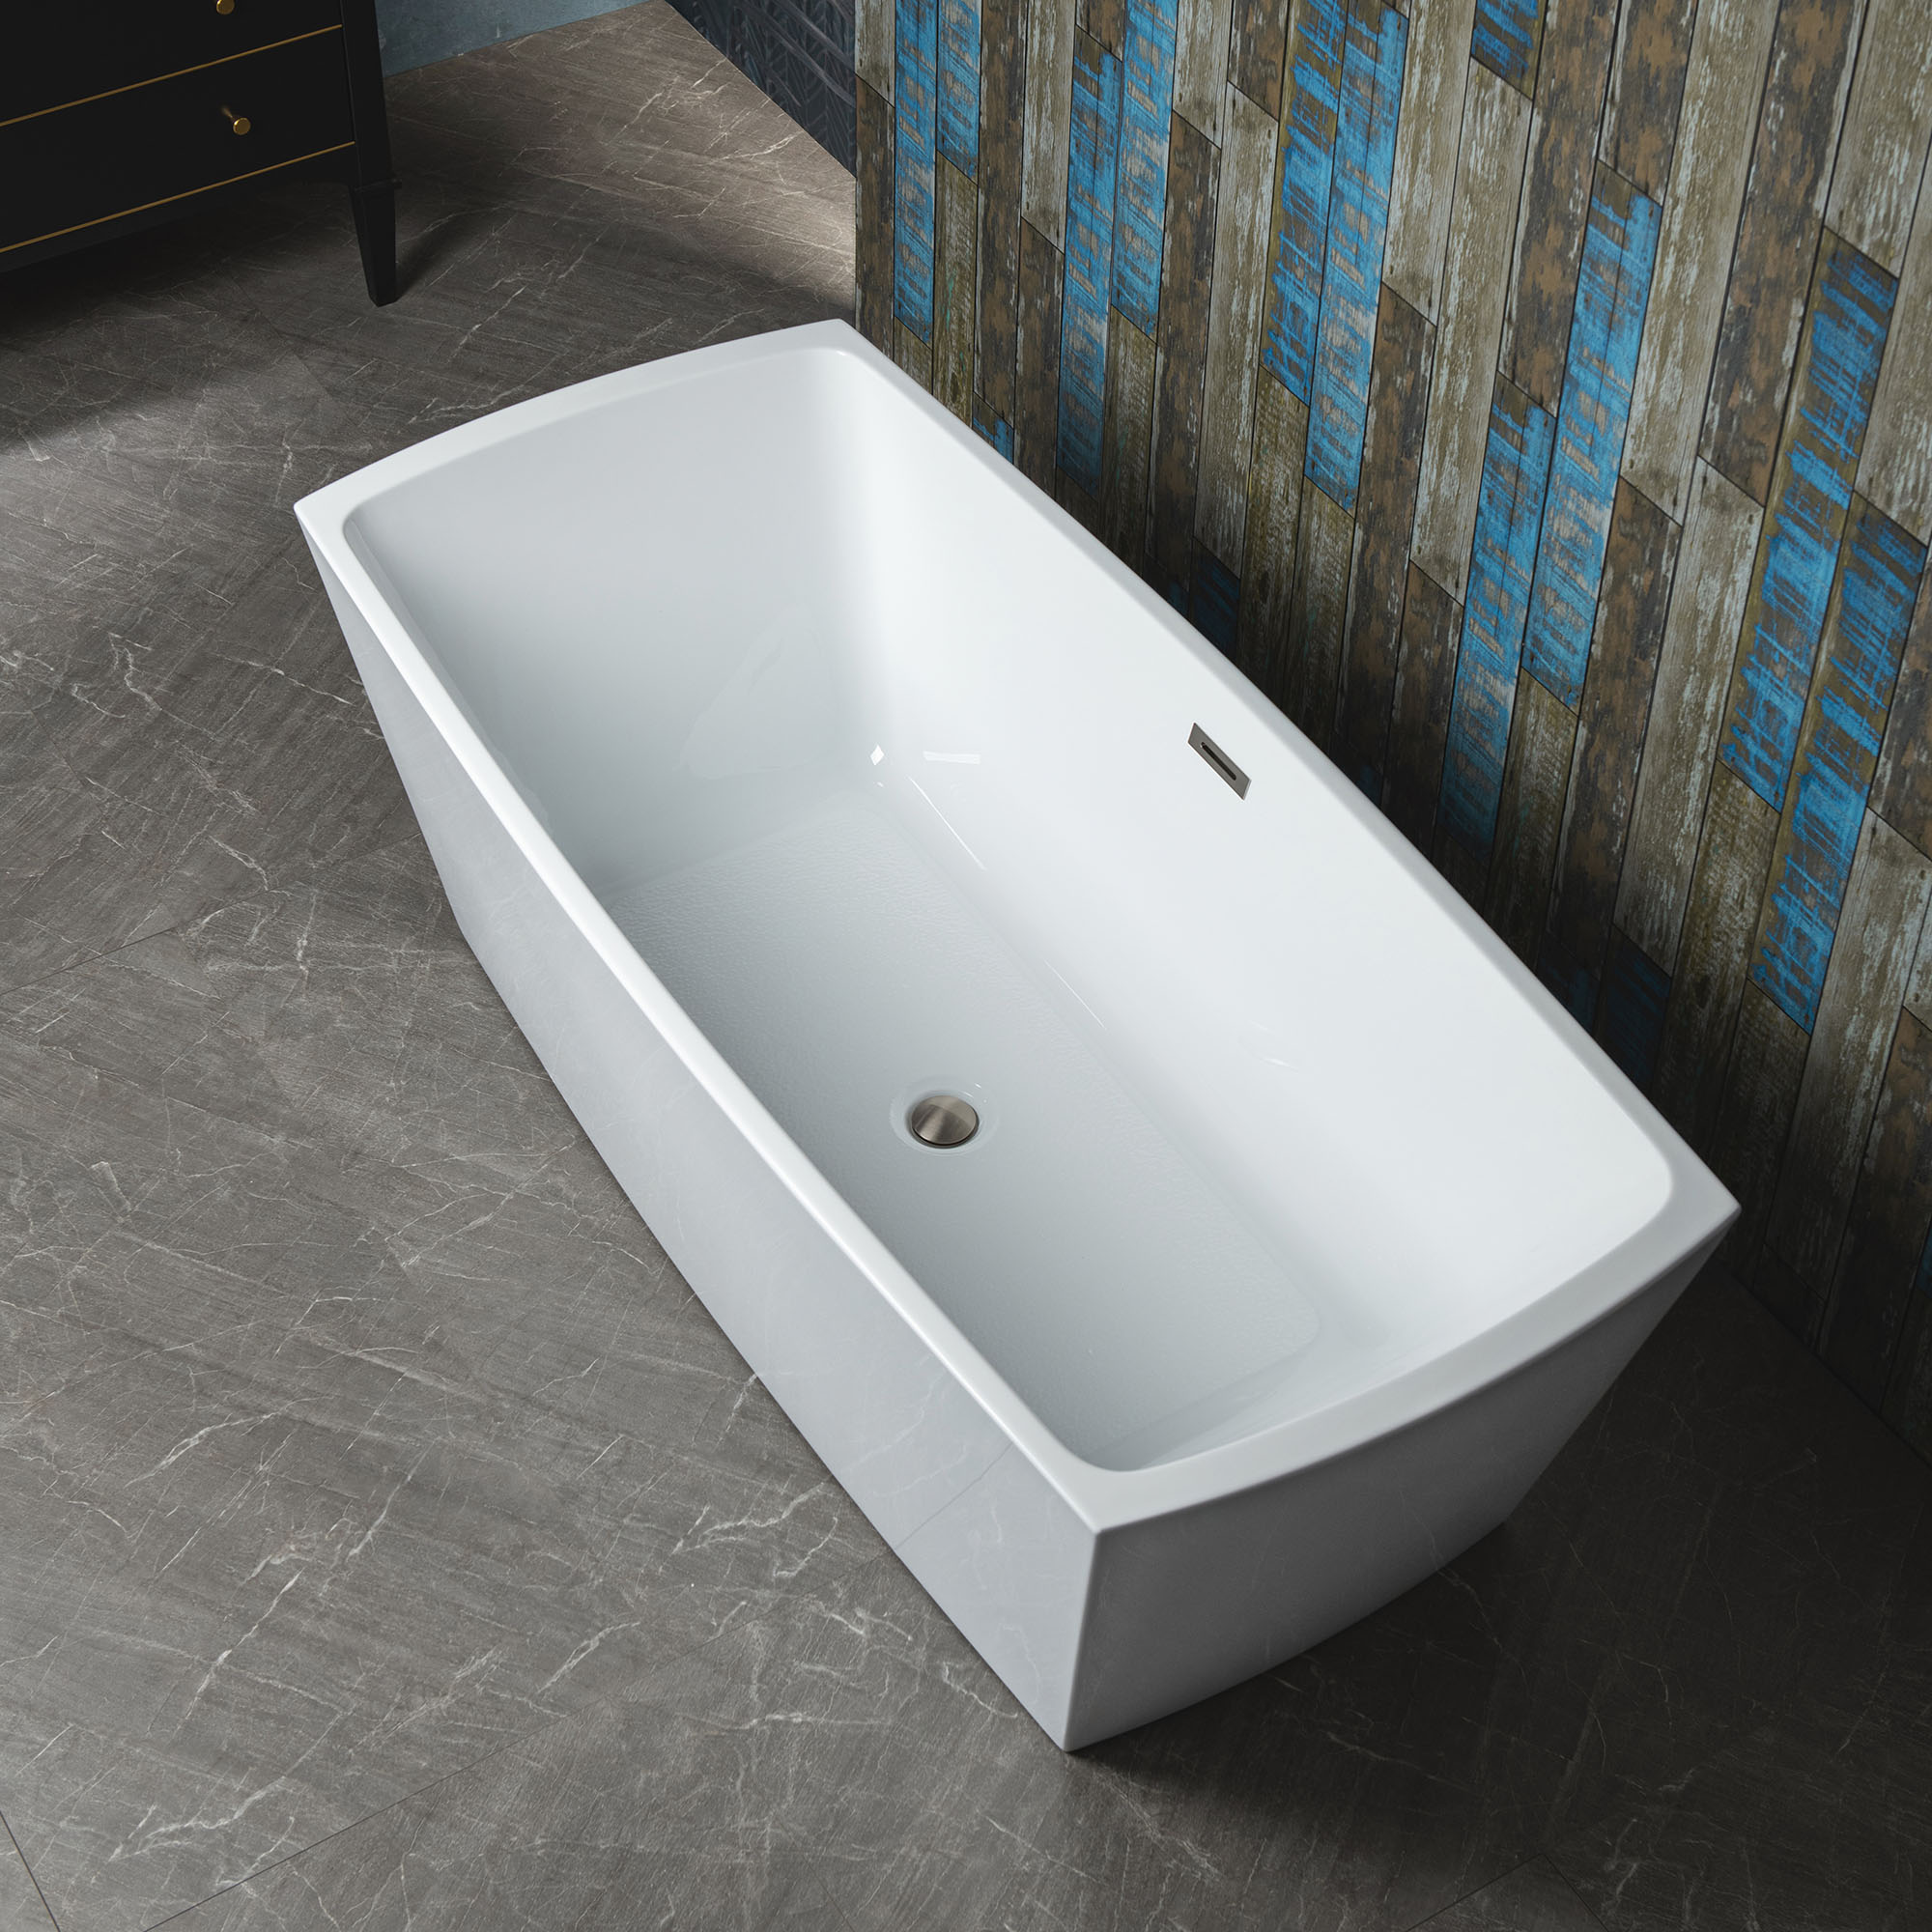 ᐅ【WOODBRIDGE 59 Acrylic Freestanding Double Ended Contemporary Soaking Tub  with Brushed Nickel Overflow and Drain Option, White, B1405-WOODBRIDGE】